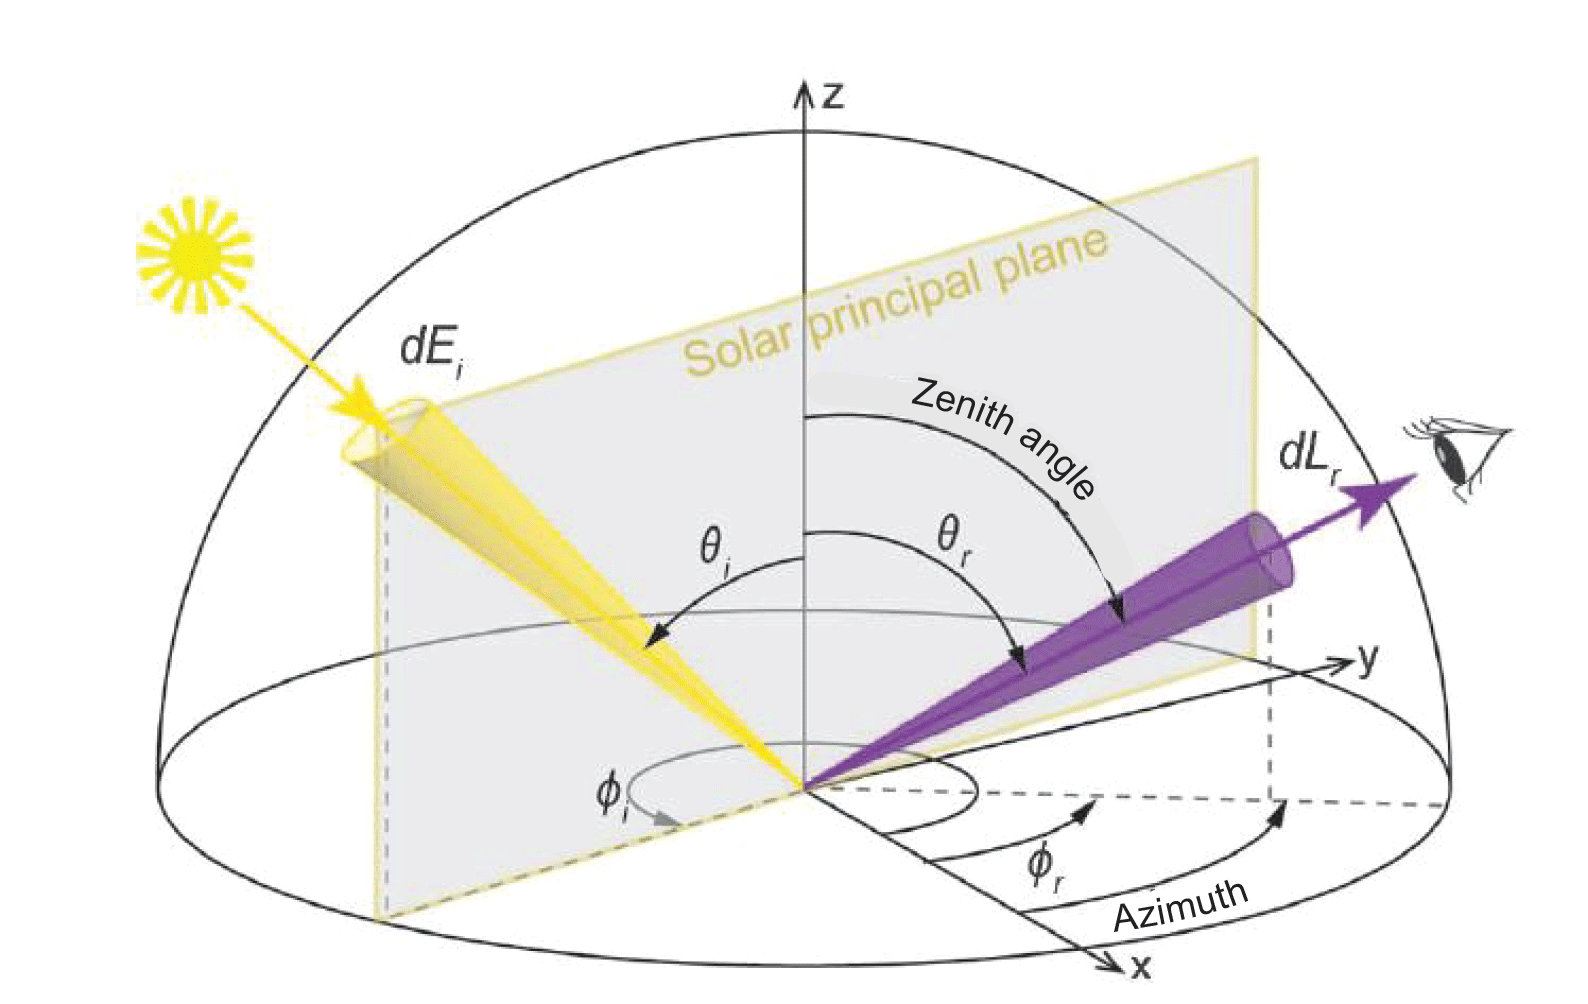 Diagram of the concept of incident and reflected angles in spherical coordinate system
                        depicting the zenith angle and azimuth.